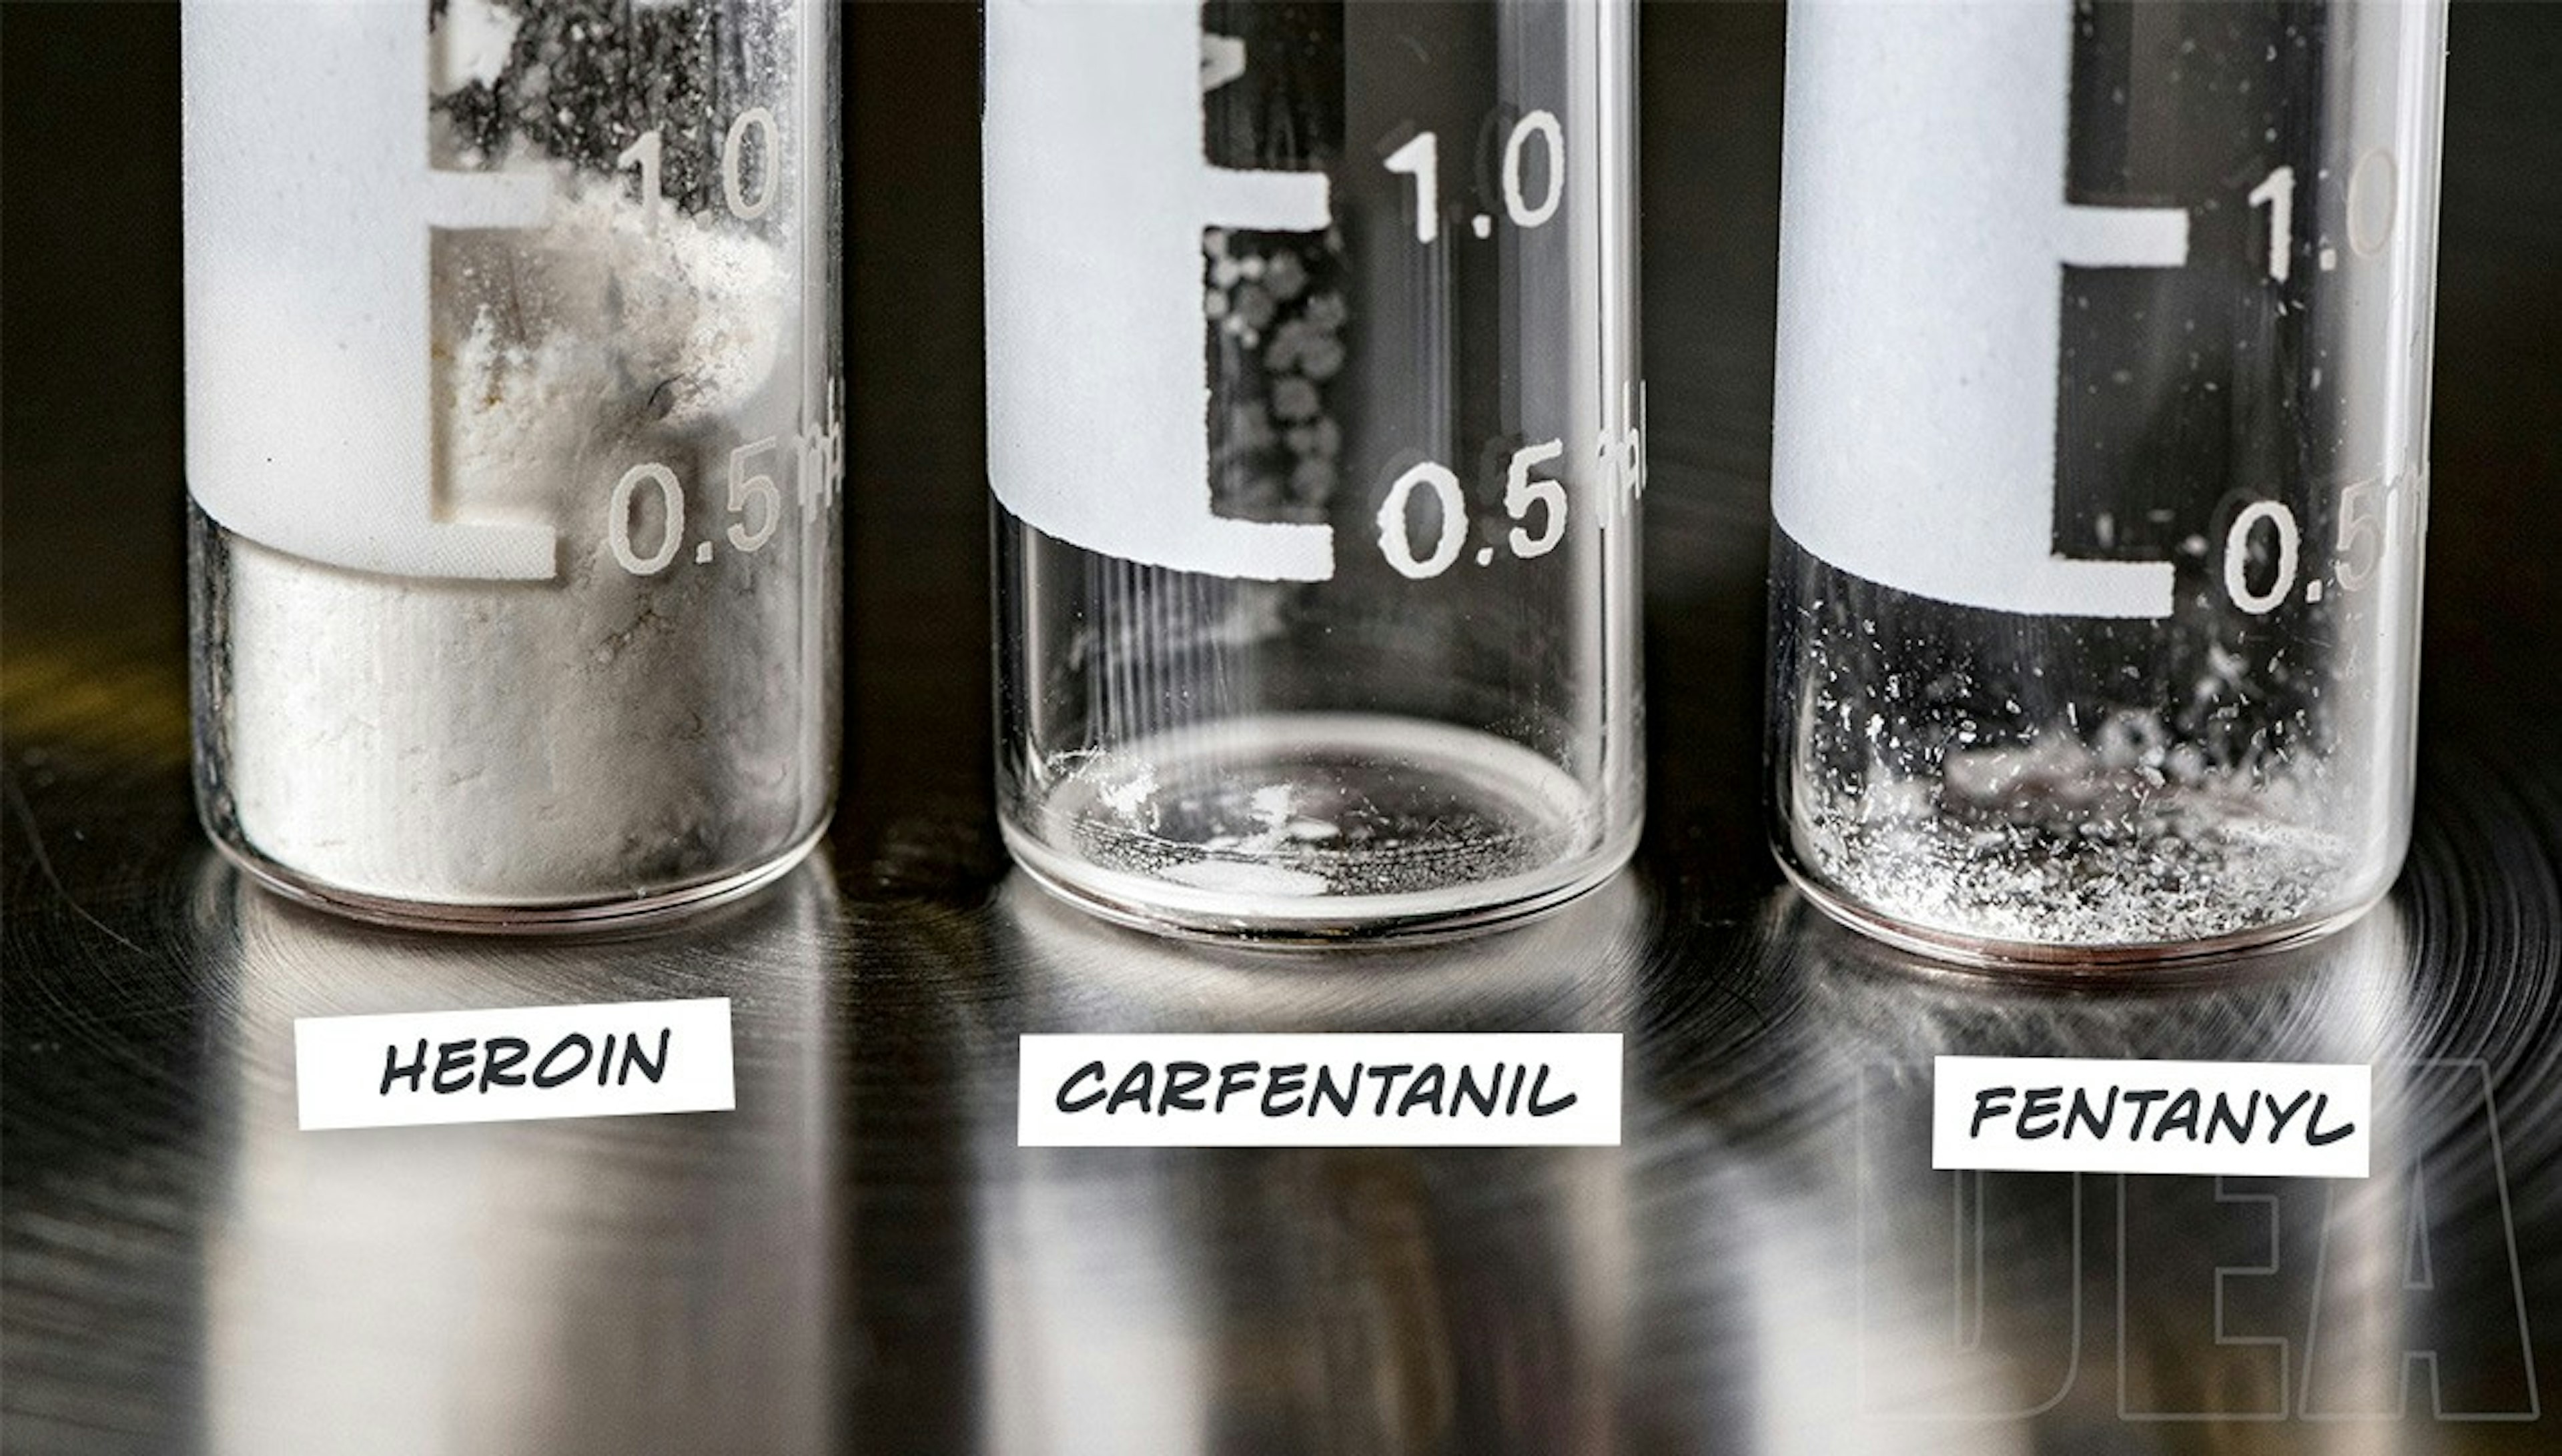 Three test tubes showing the same lethal dosage of fentanyl is barely visible compared to lethal doses of heroin and carfentanil.